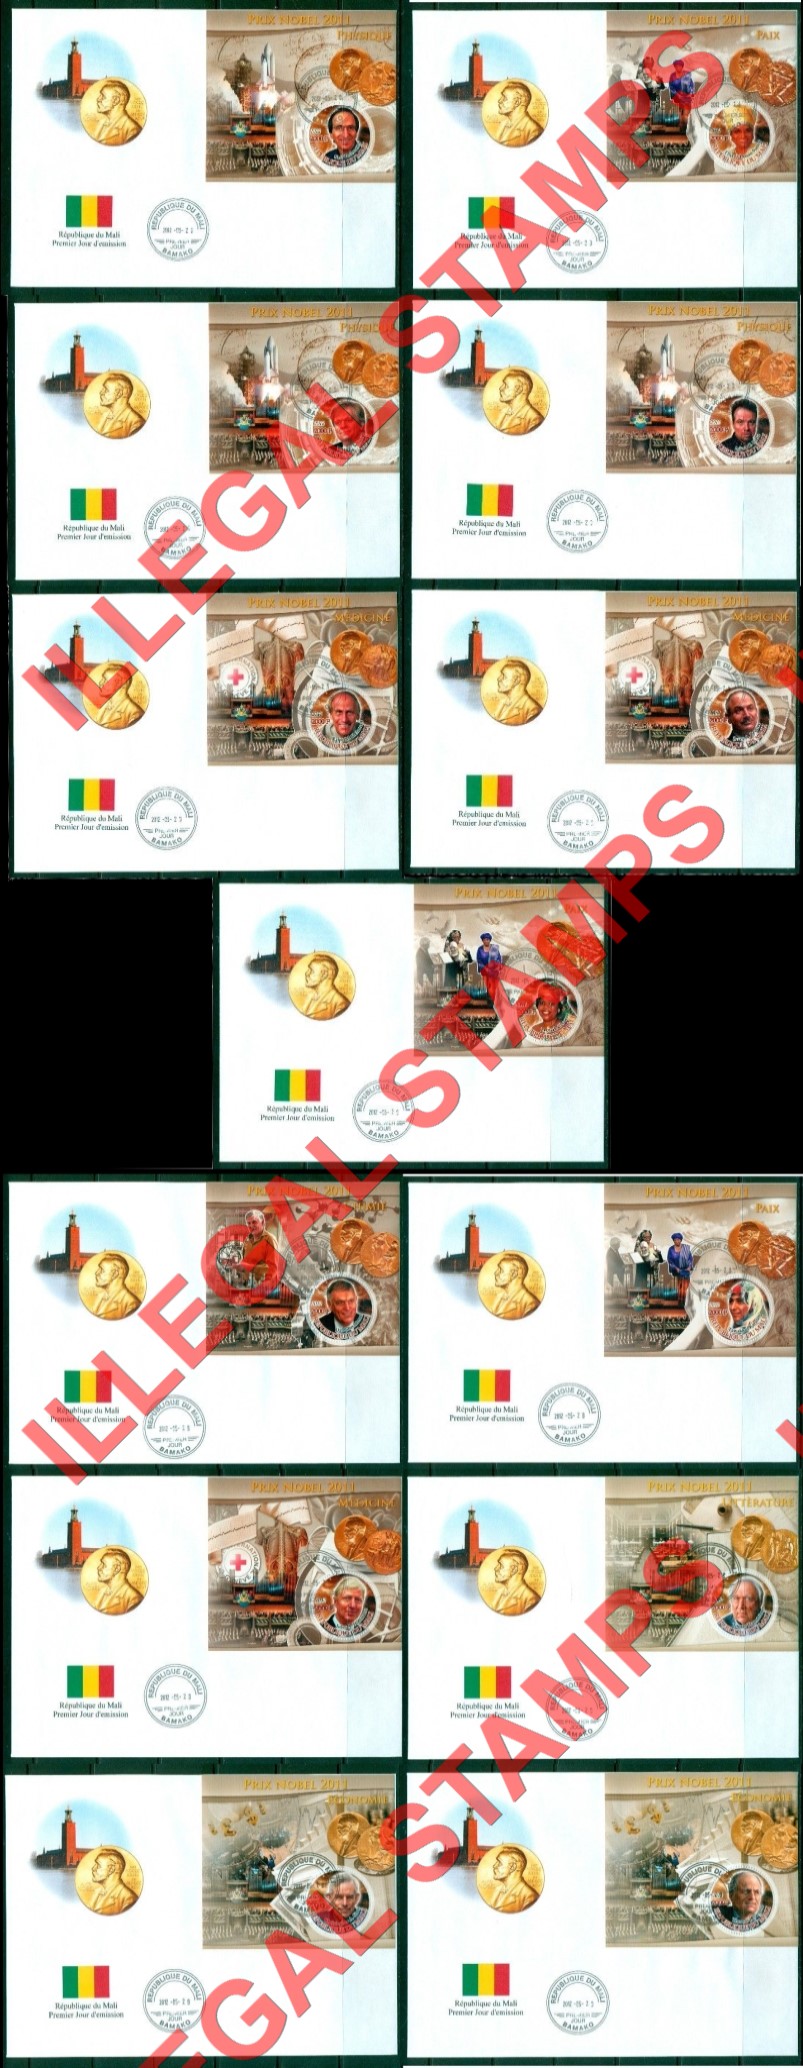 Mali 2011 Nobel Prize Illegal Stamp Souvenir Sheets of 1 on Fake First Day Covers